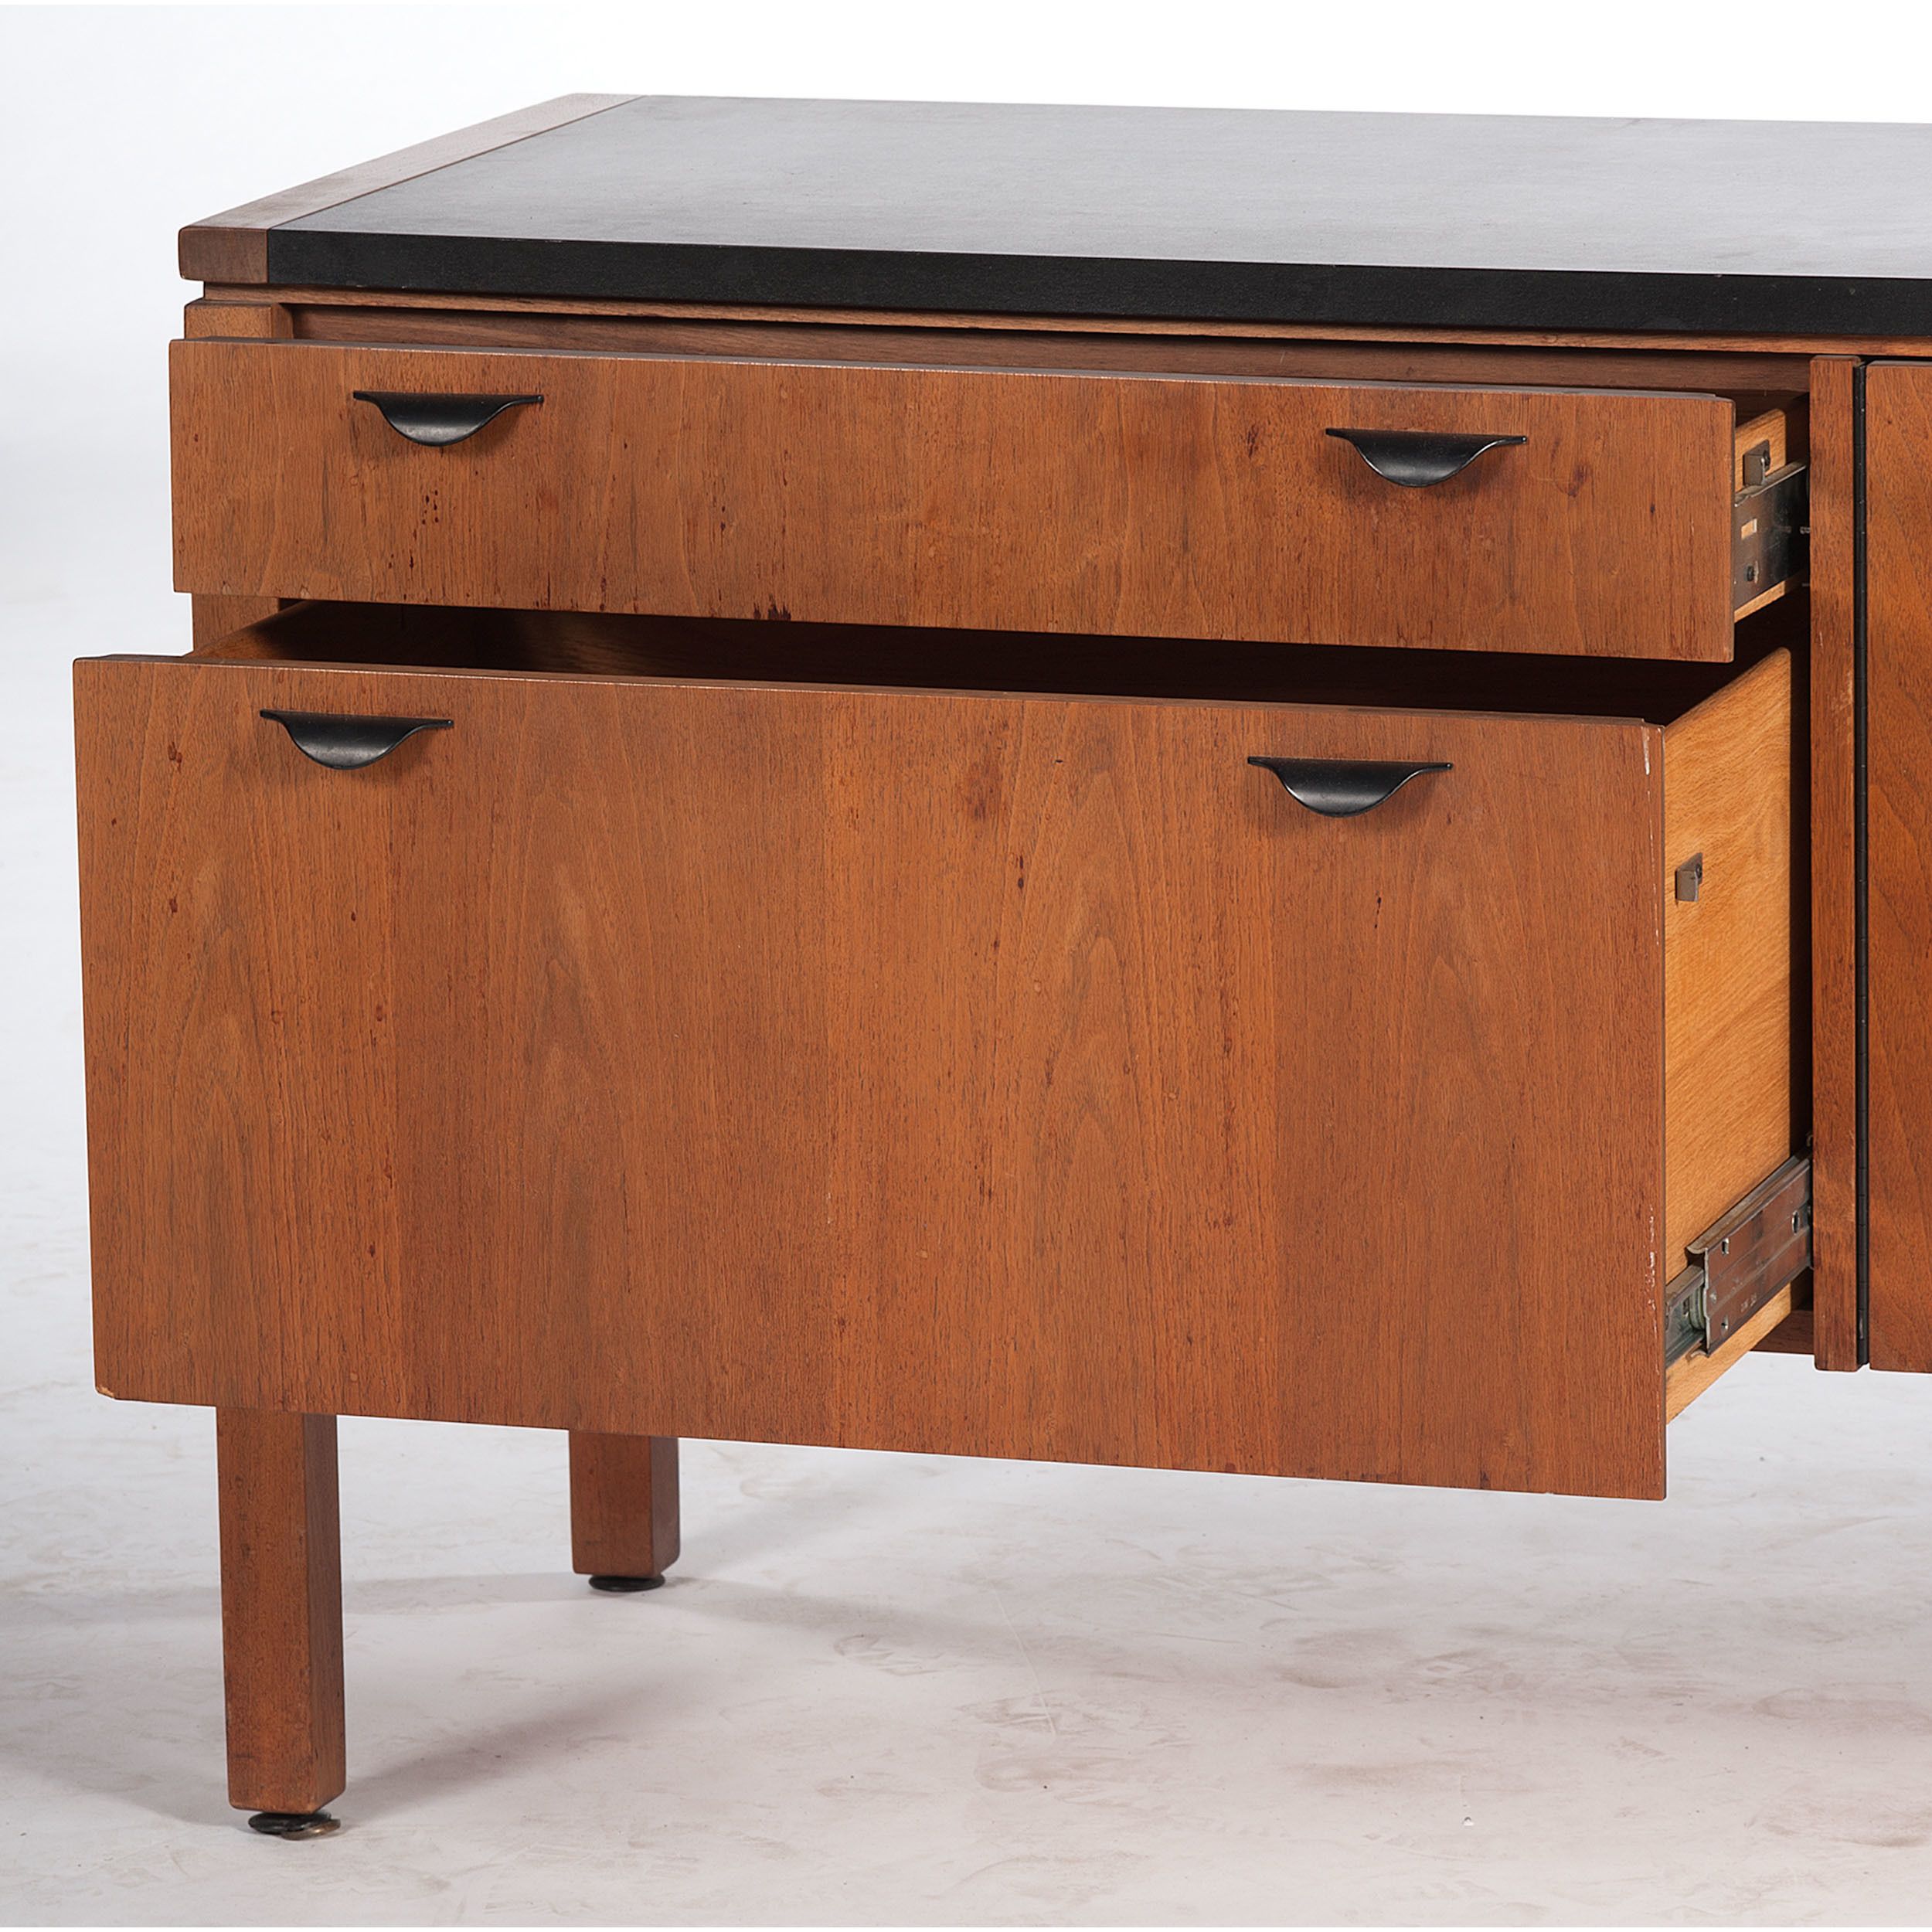 Mid Century Modern Sideboard With Black Laminate Top | Cowan's Auction Throughout Cleveland Server (View 18 of 22)